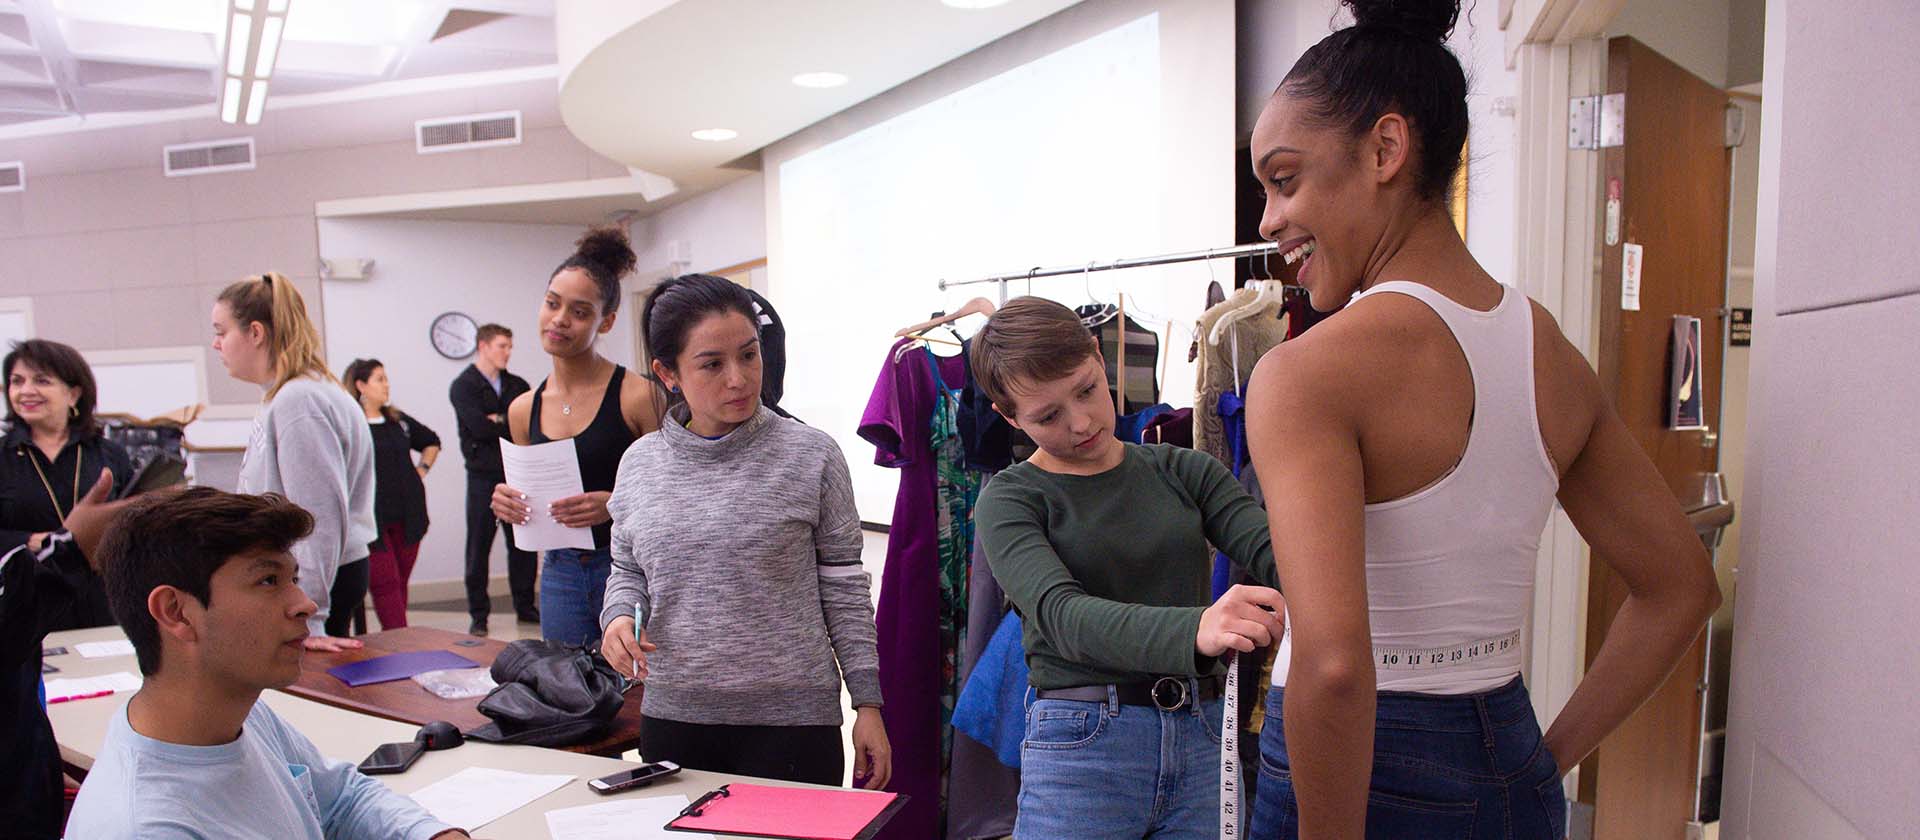 Group of students in fashion program measuring sizes and discussing latest designs